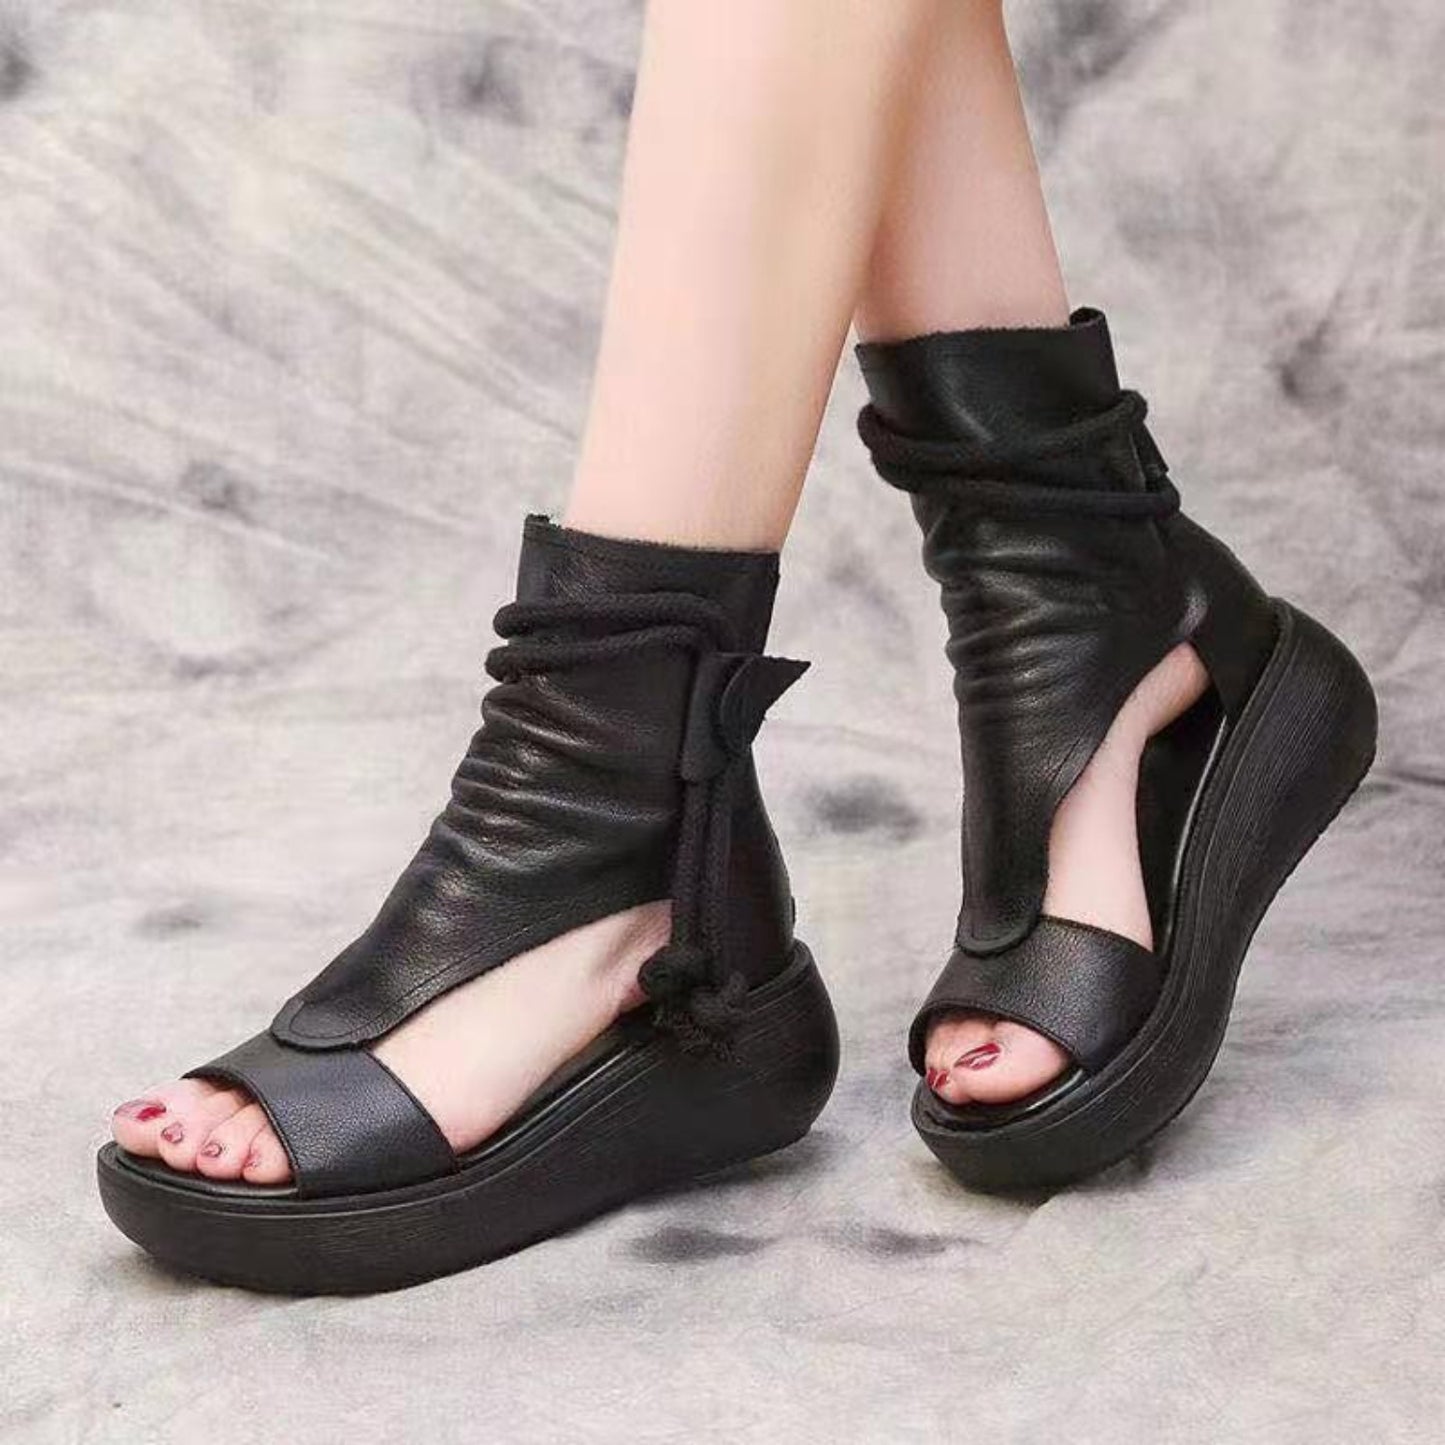 PU Leather Open Toe Wedge Sandals